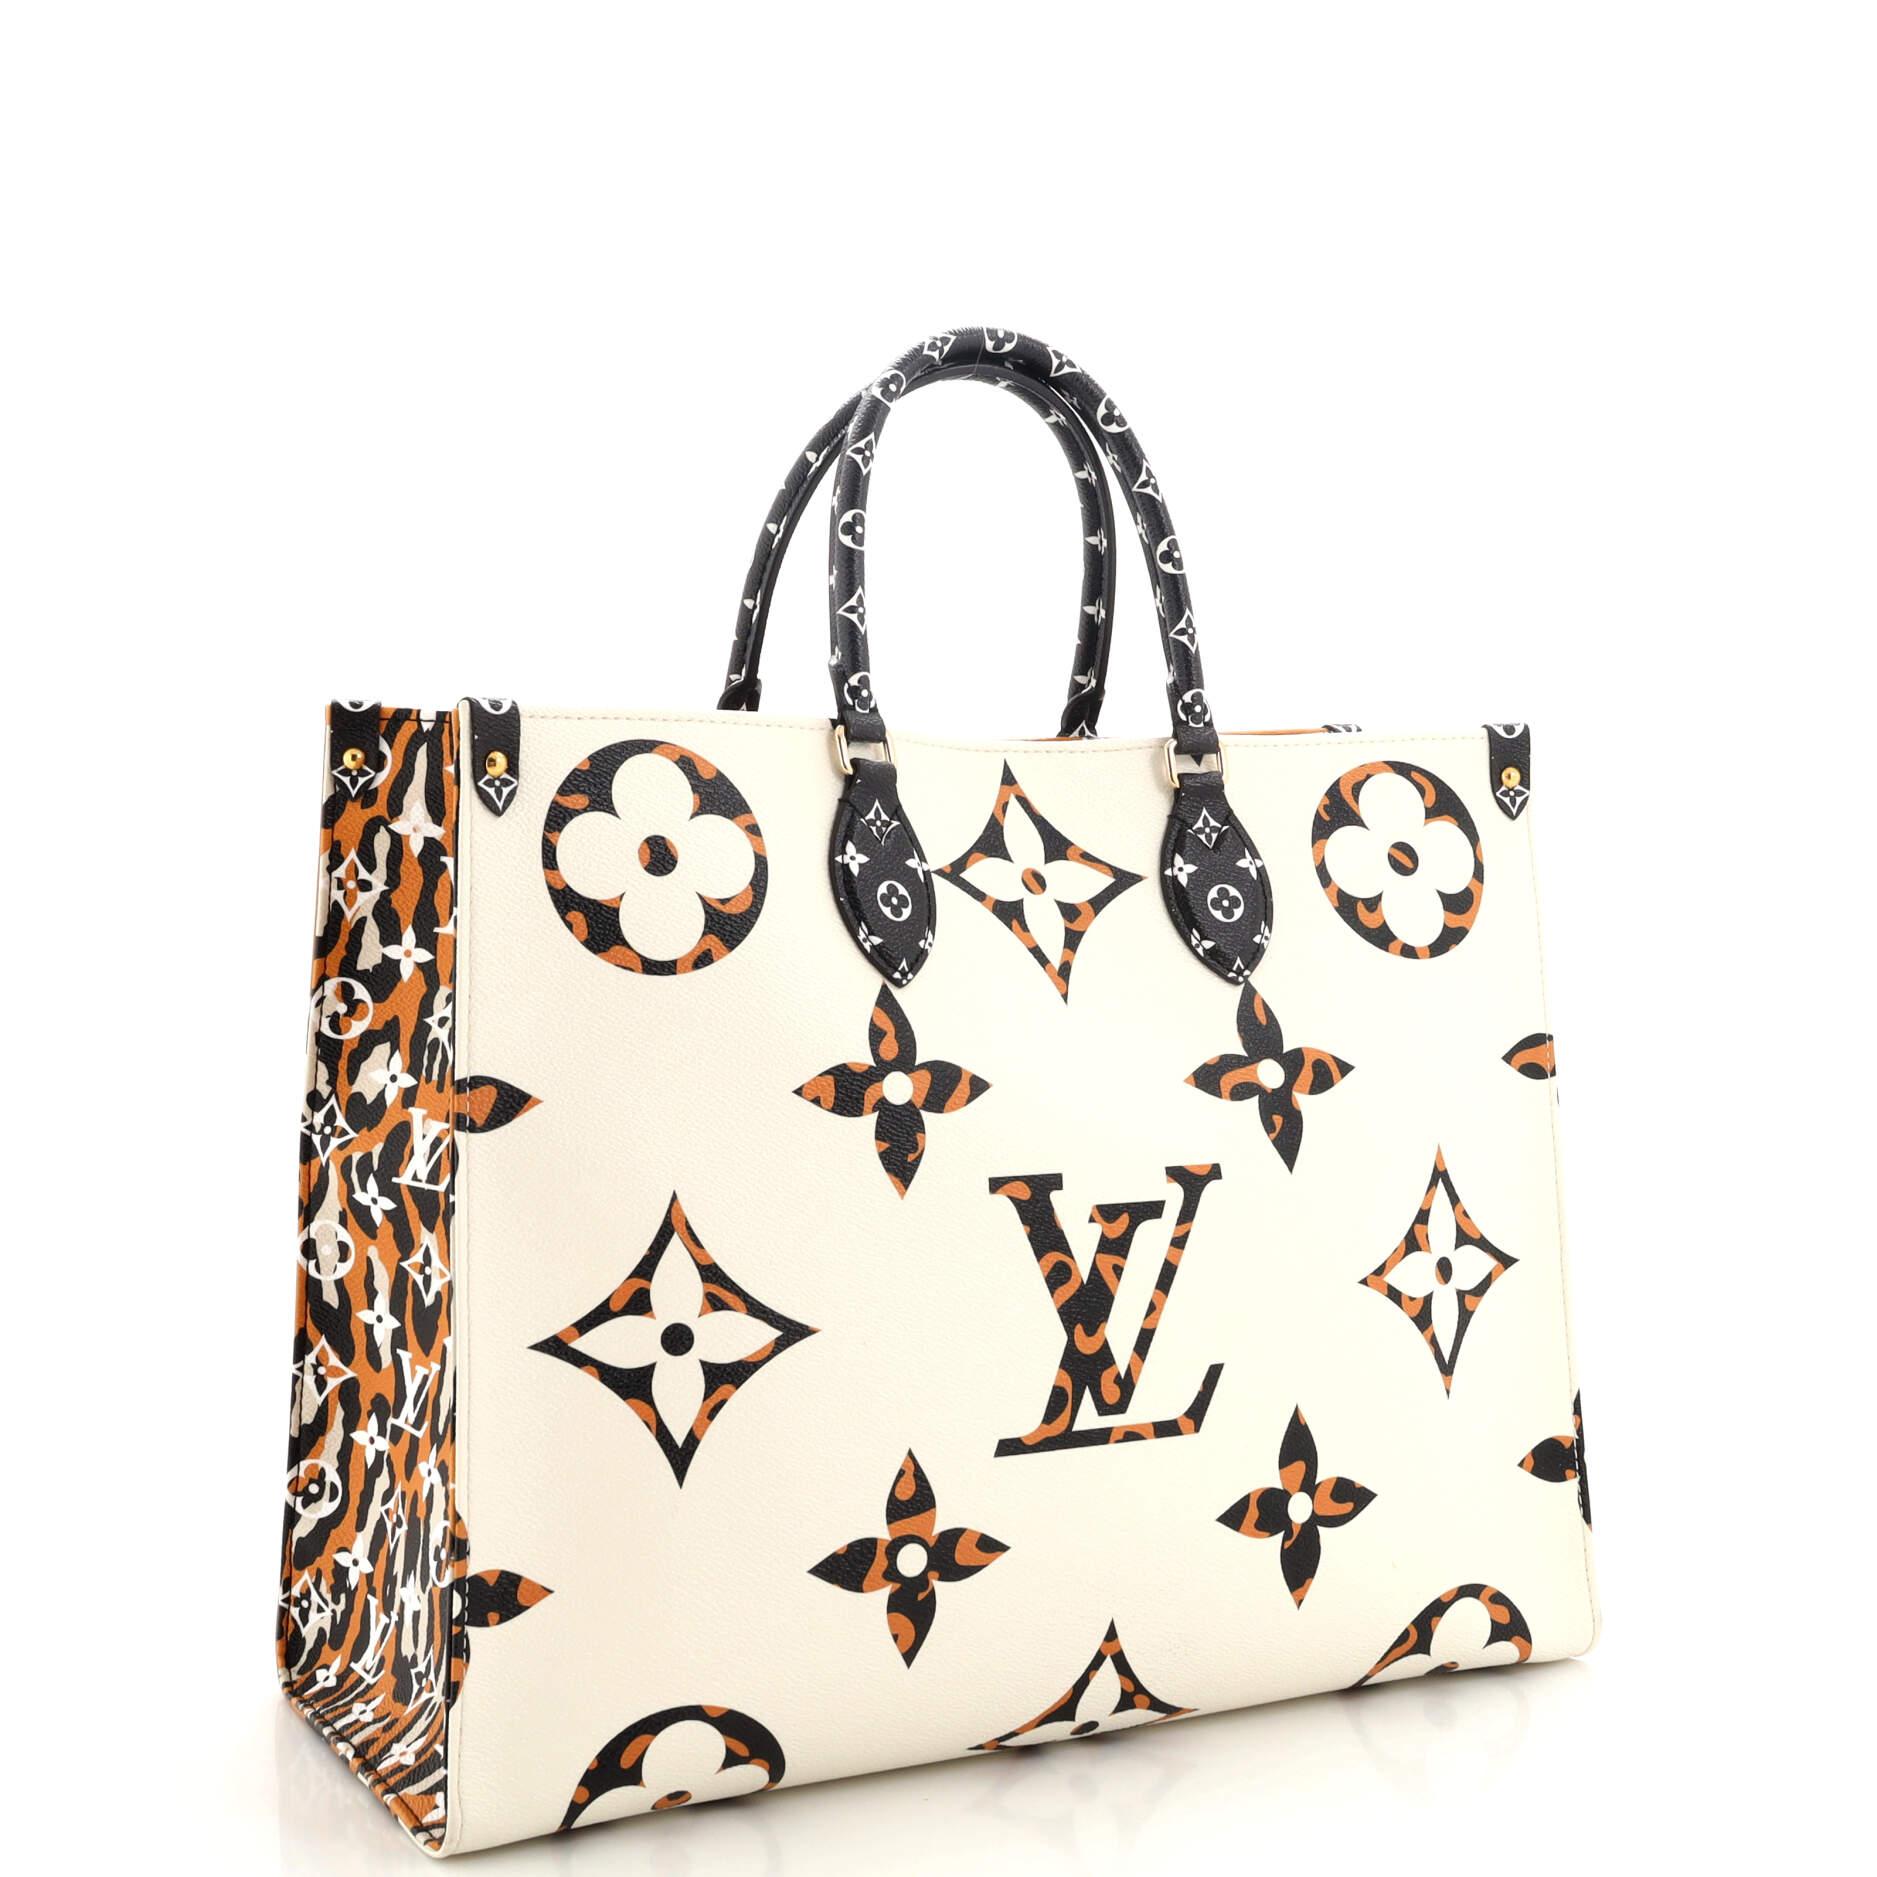 Bag of the Day 31: Louis Vuitton ONTHEGO on the go Monogram Jungle